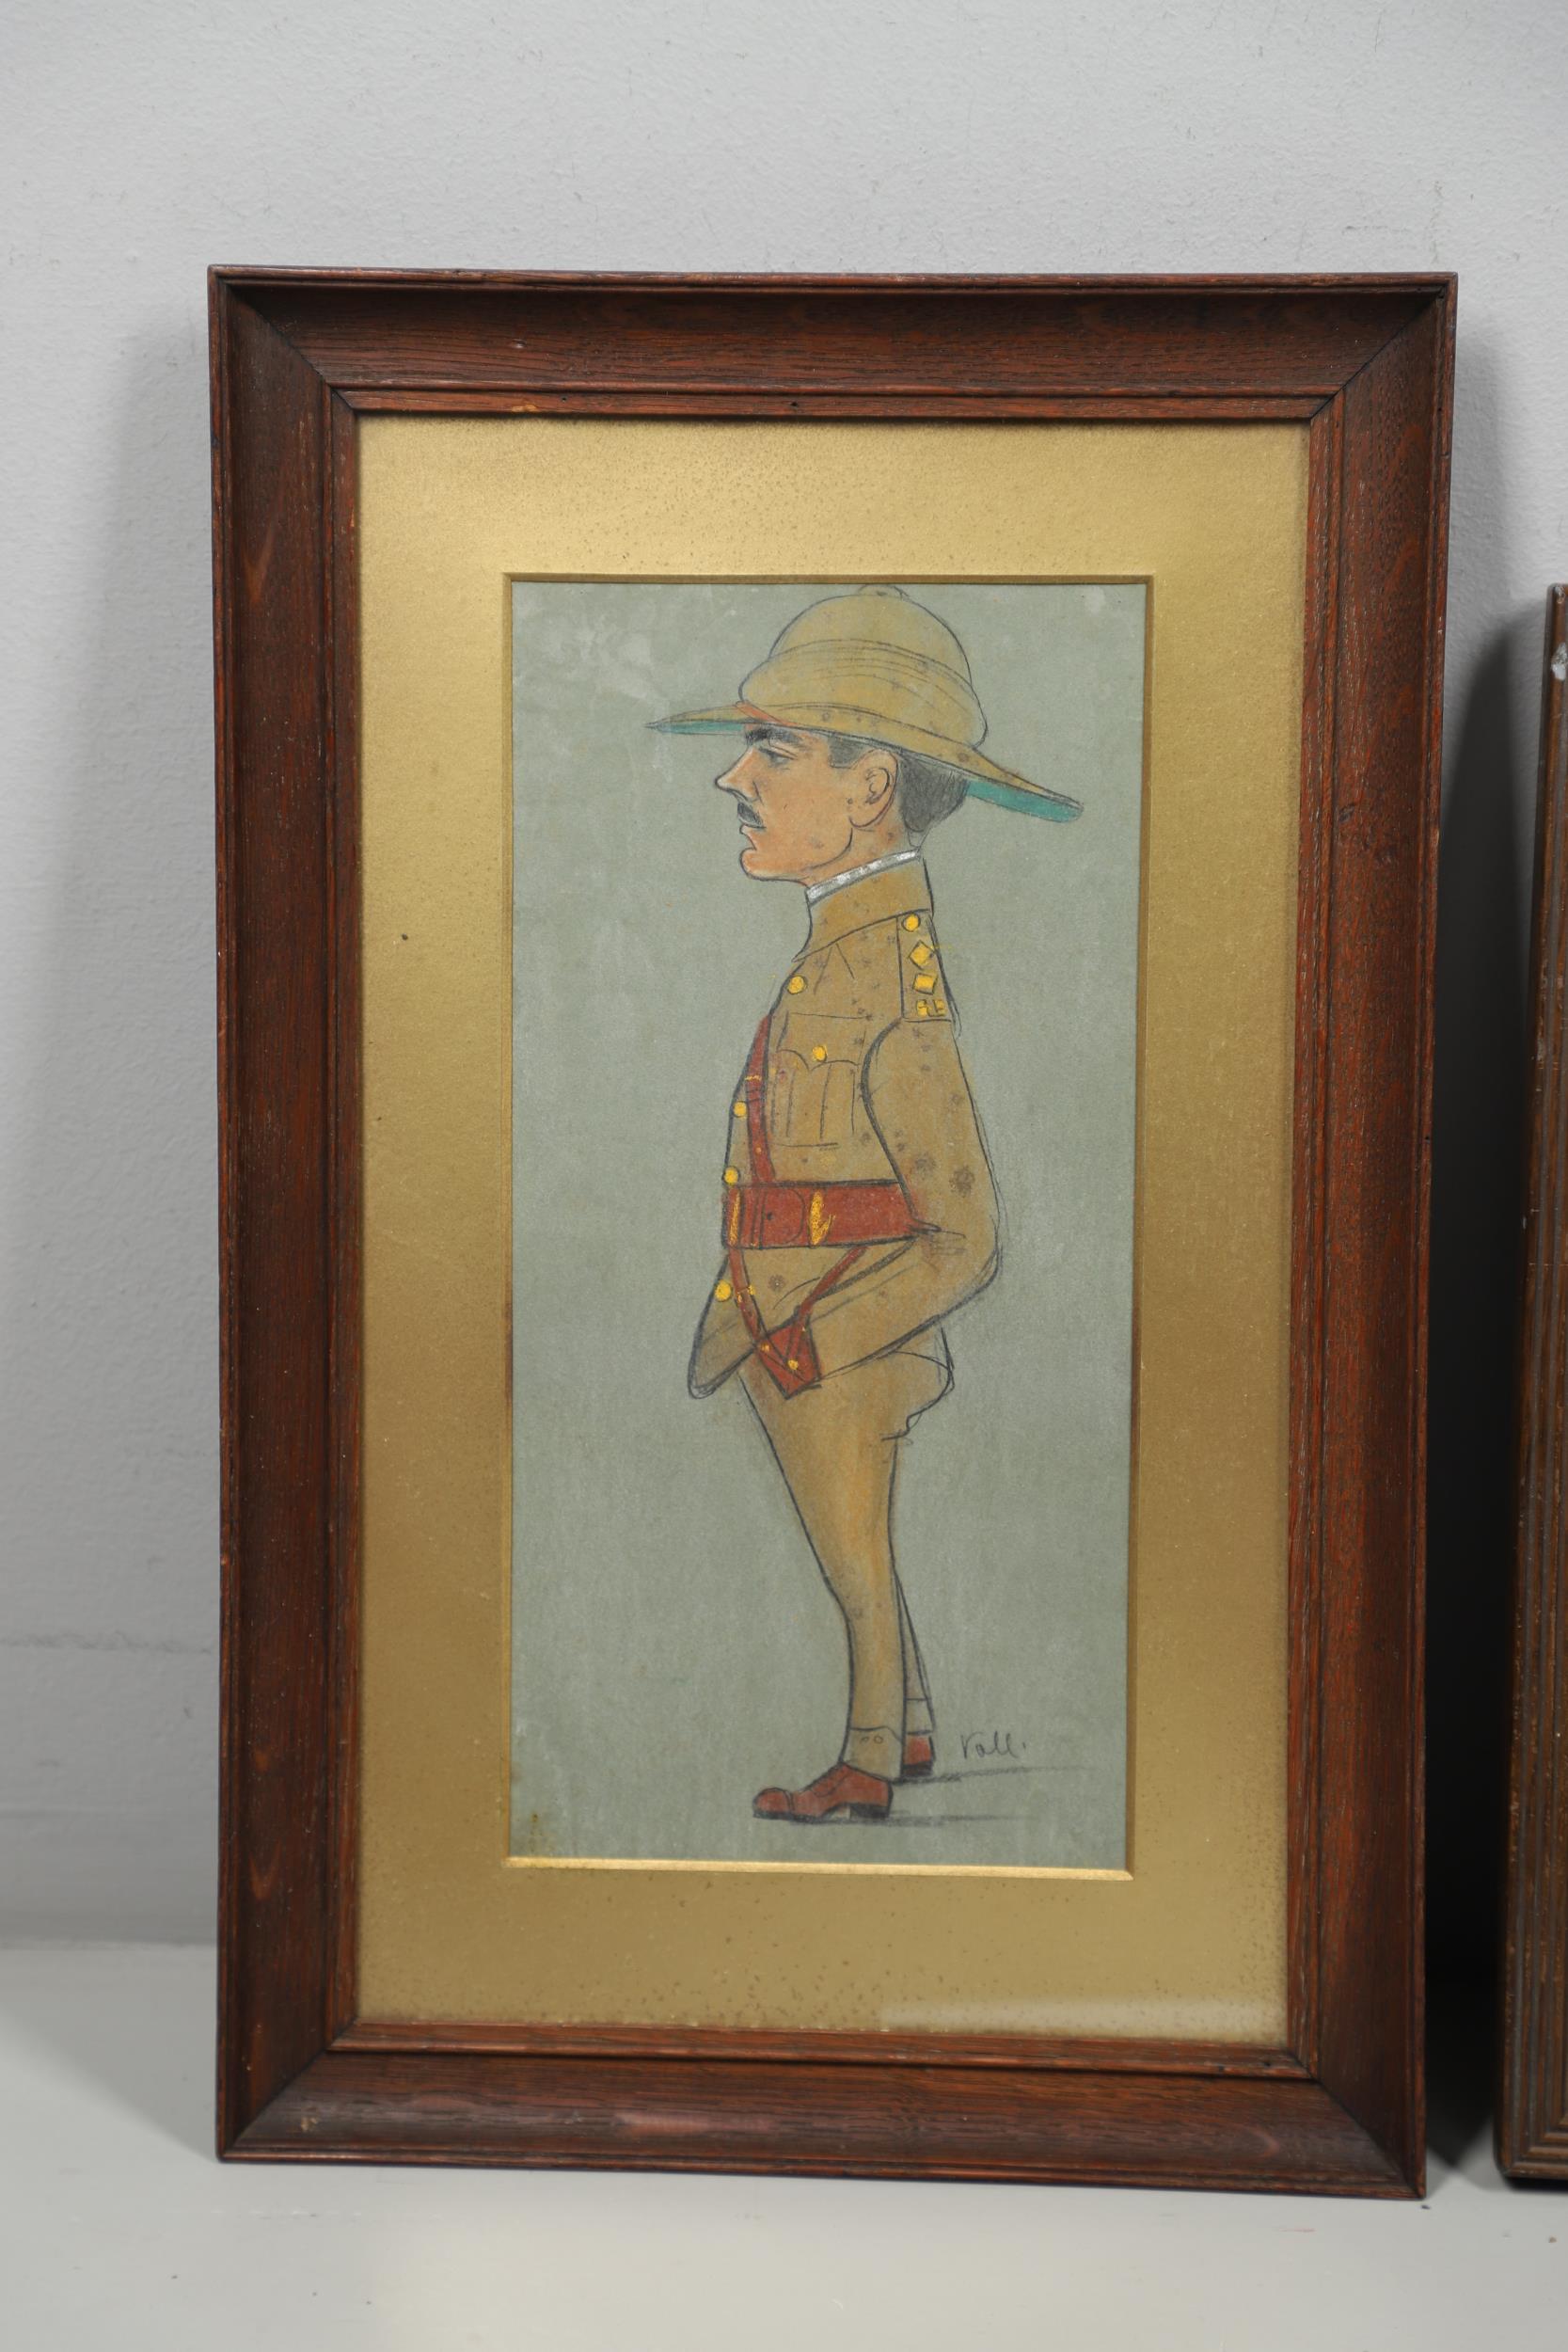 A CARICATURE AND MEMORIAL TO CAPTAIN BERNARD WOODHOUSE OF THE ROYAL ARMY MEDICAL CORPS. - Image 2 of 5